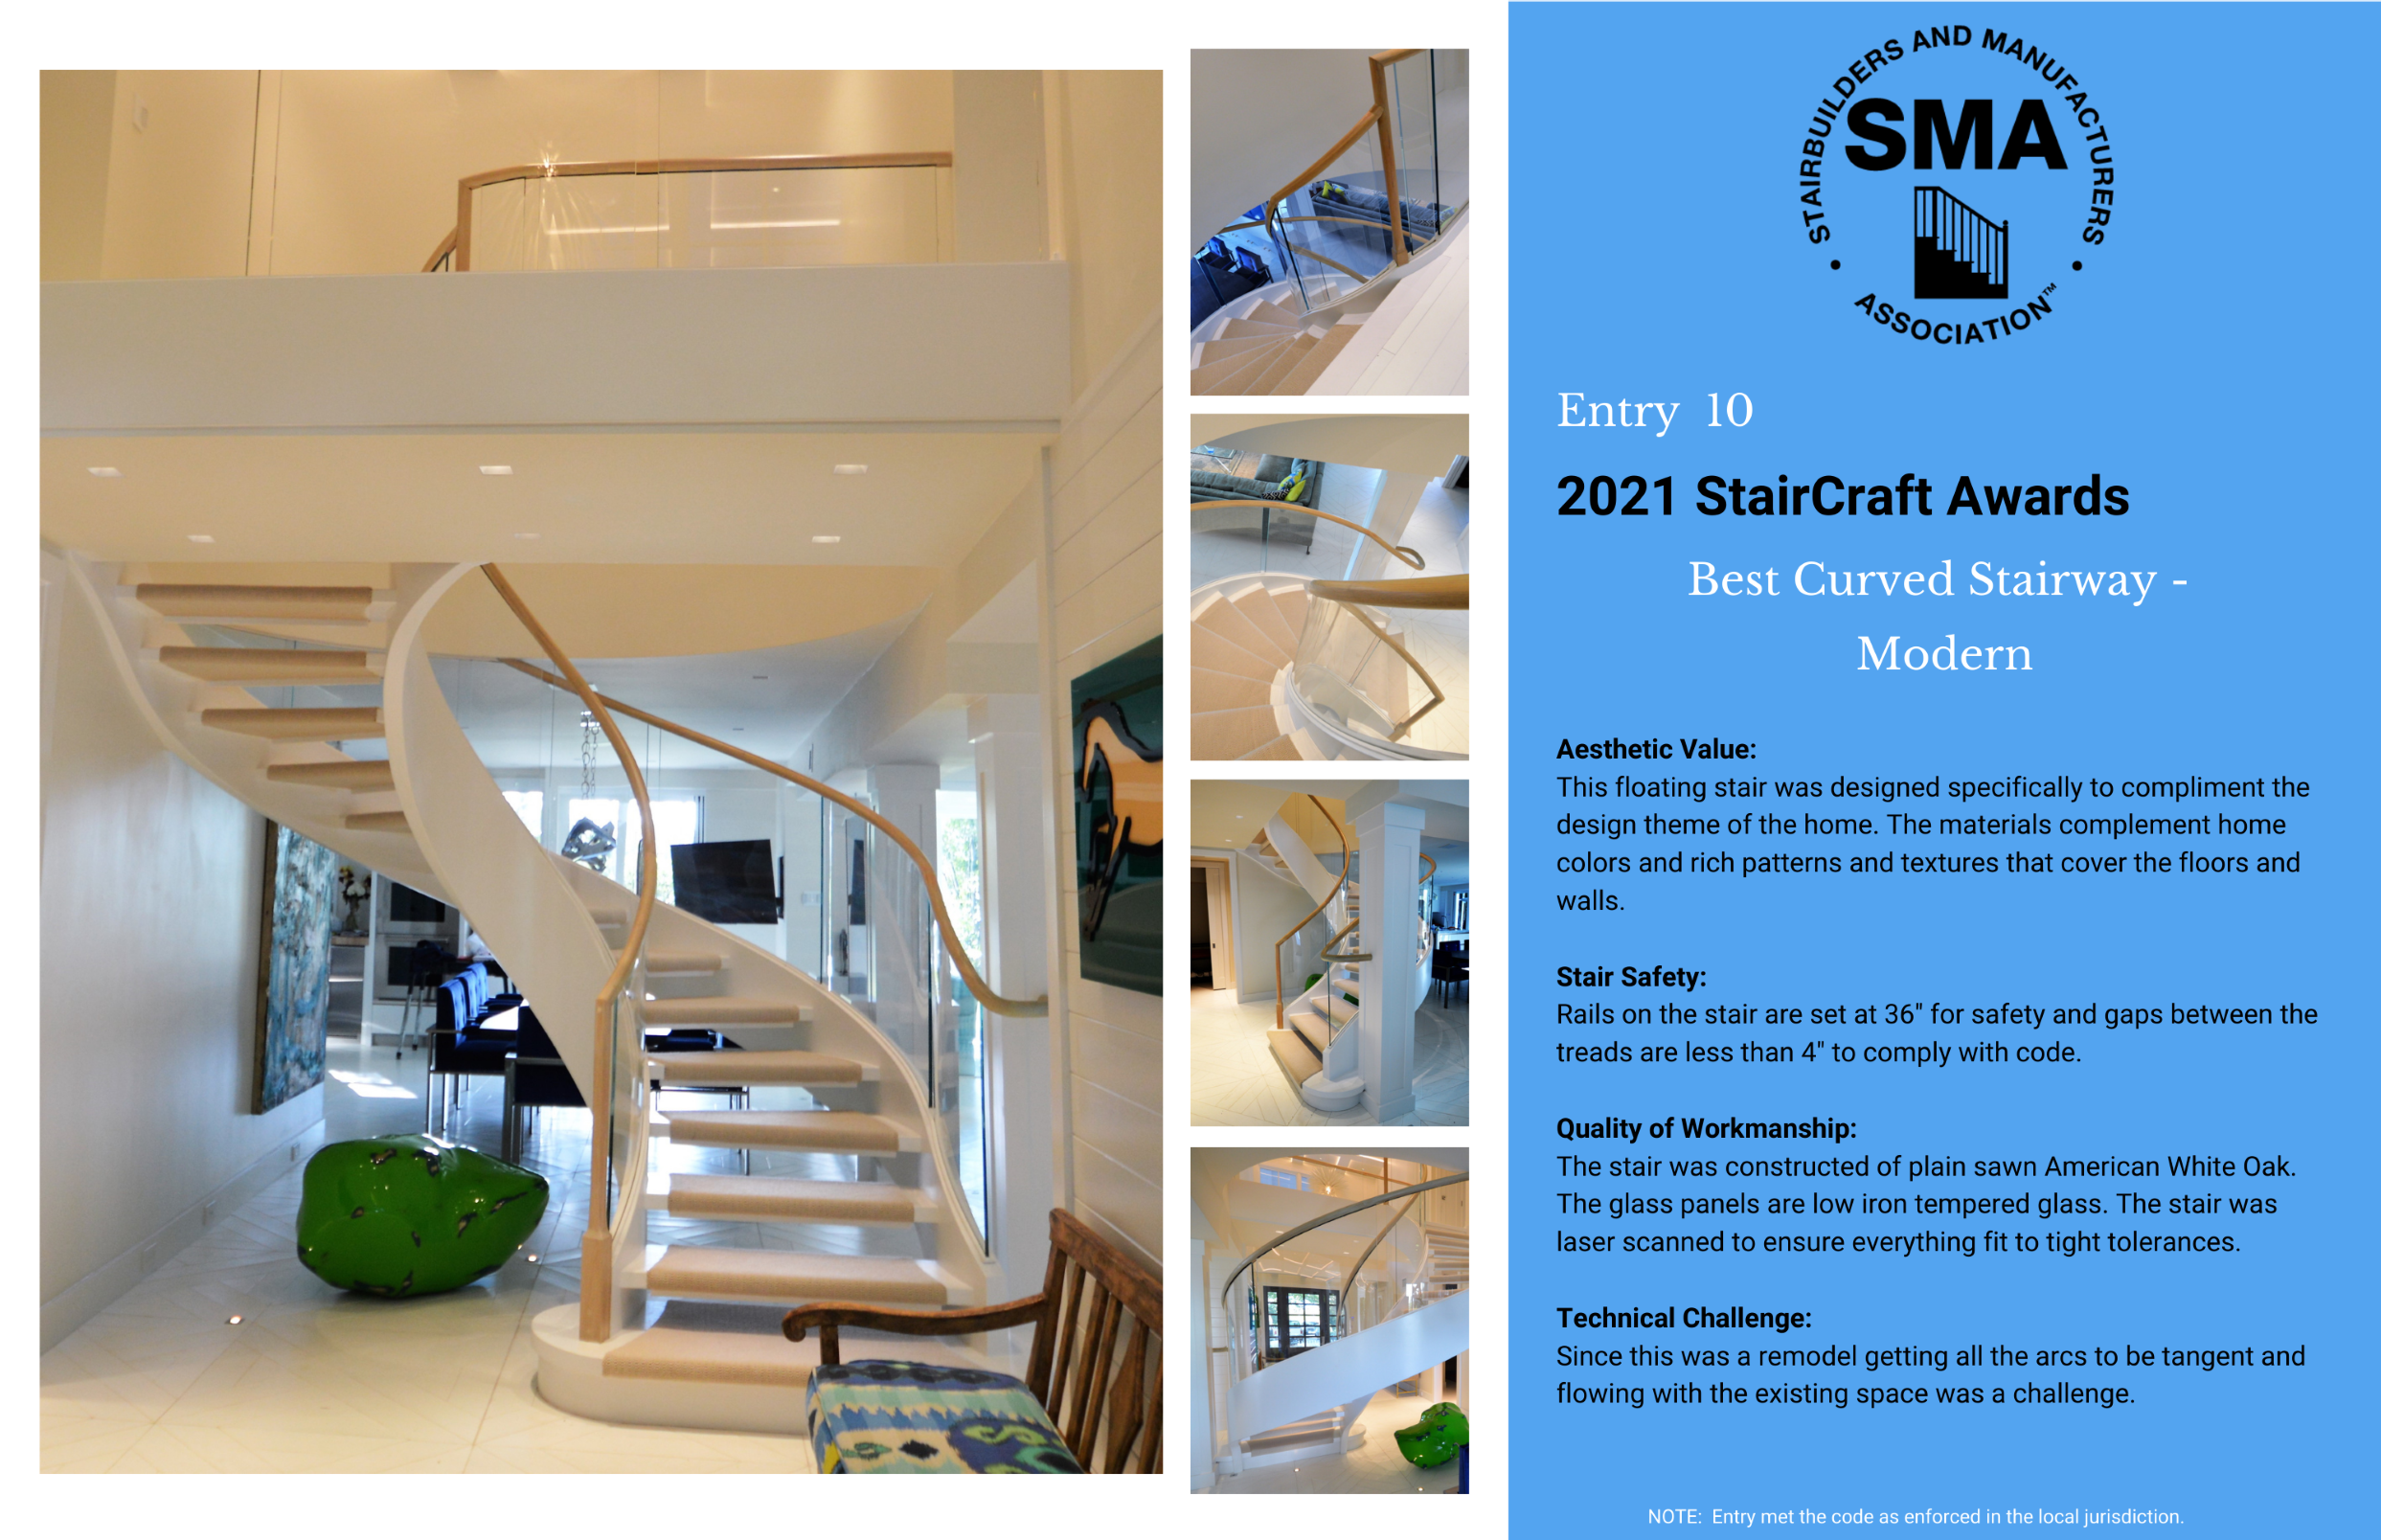 2021 StairCraft Awards Entry 10